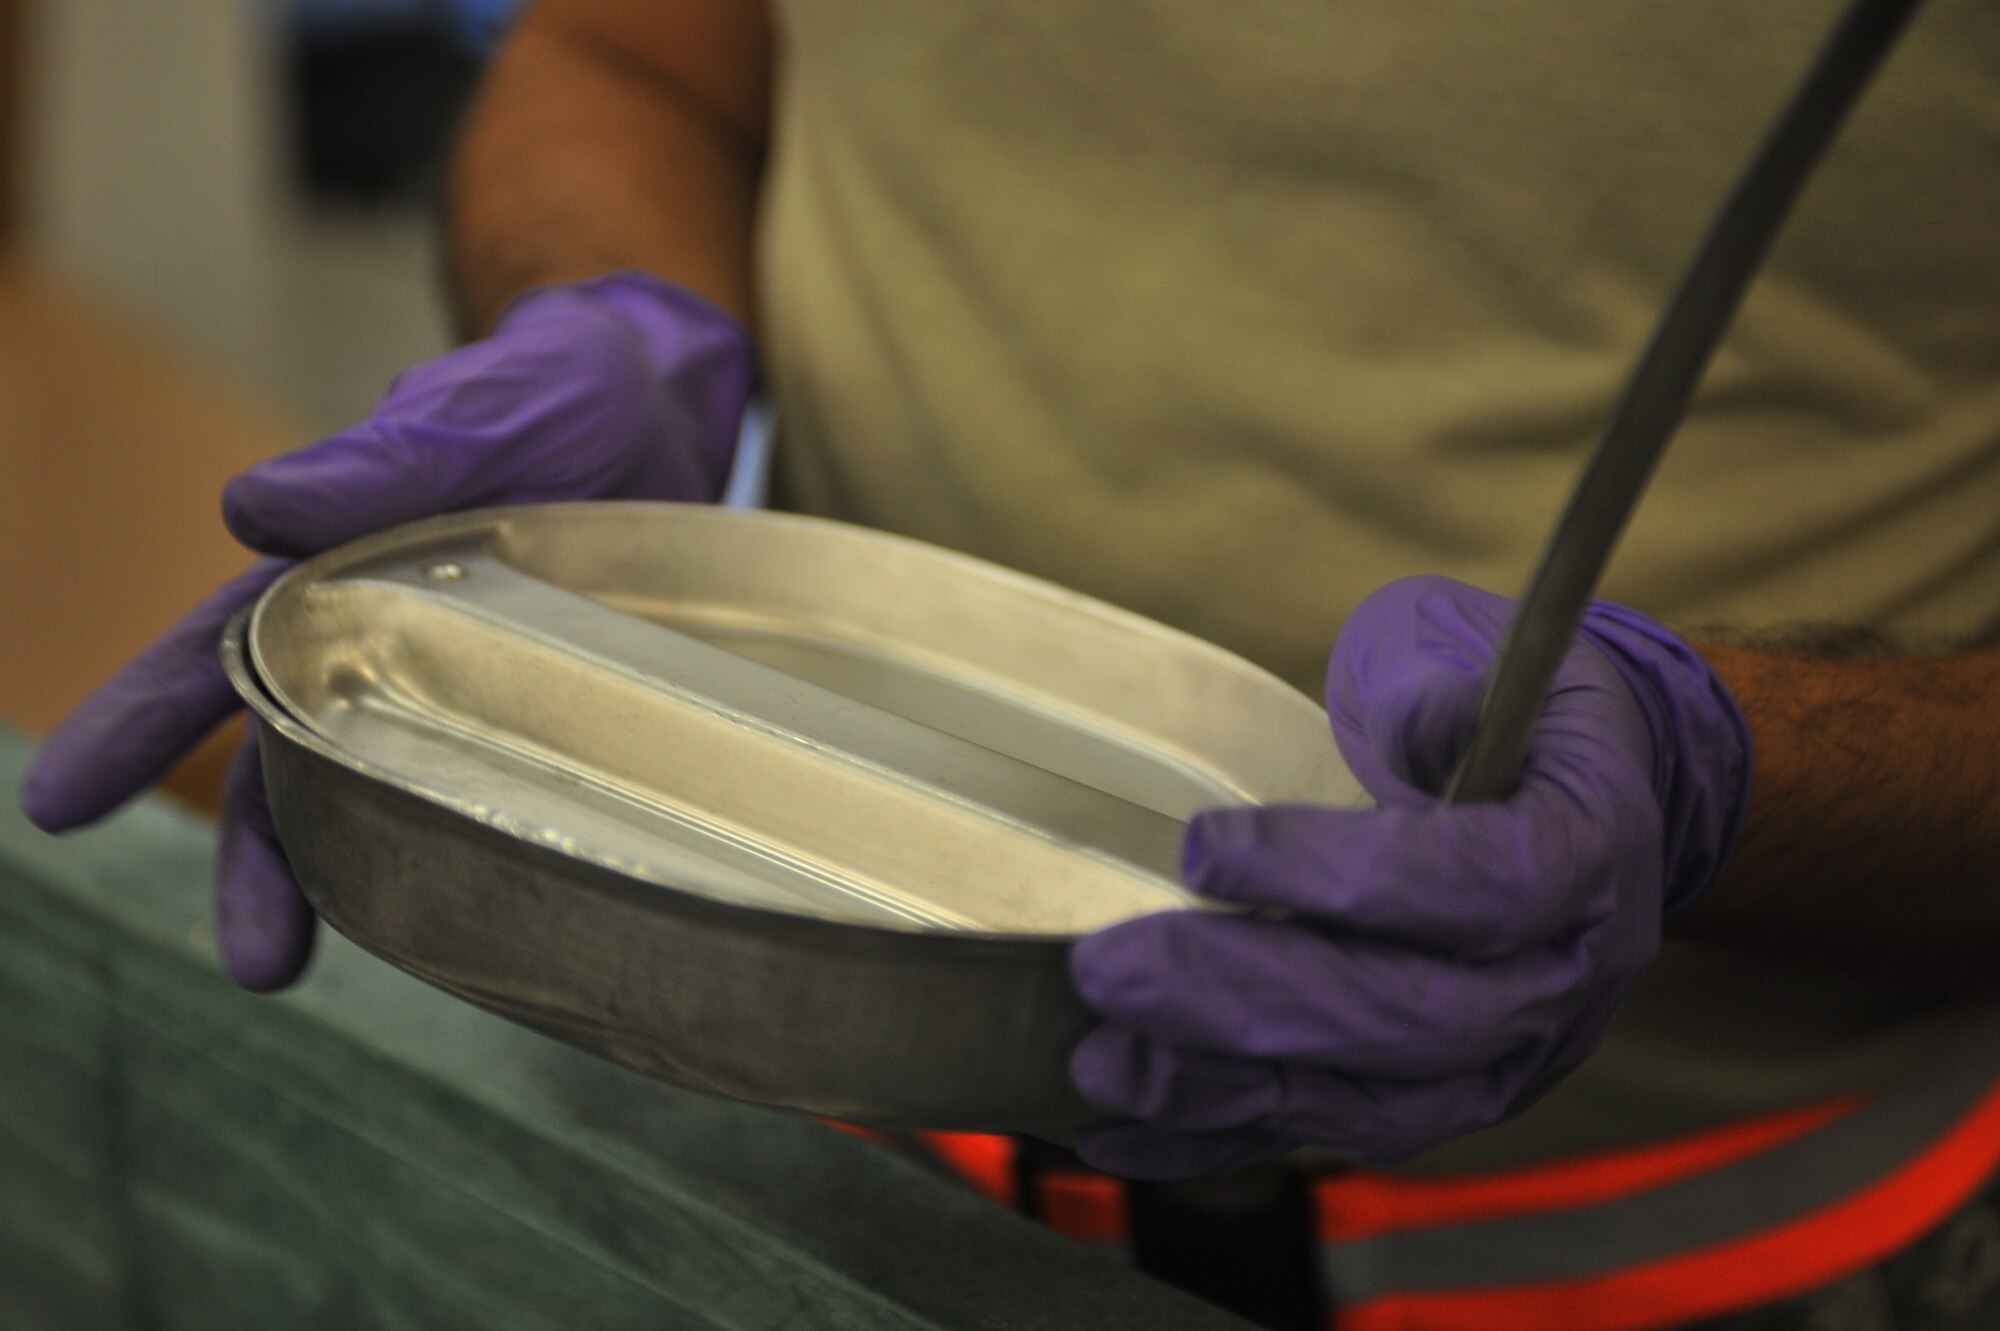 U.S. Air Force Staff Sgt. Santos Delacruz, 27th Special Operations Logistics Readiness Squadron material management flight, holds a mess kit at Cannon Air Force Base, N.M., July 18, 2012. The need for mess kits to serve military rations is no longer necessary, as they were replaced by Meals, Ready to Eat. (U.S. Air Force photo/Airman 1st Class Eboni Reece)